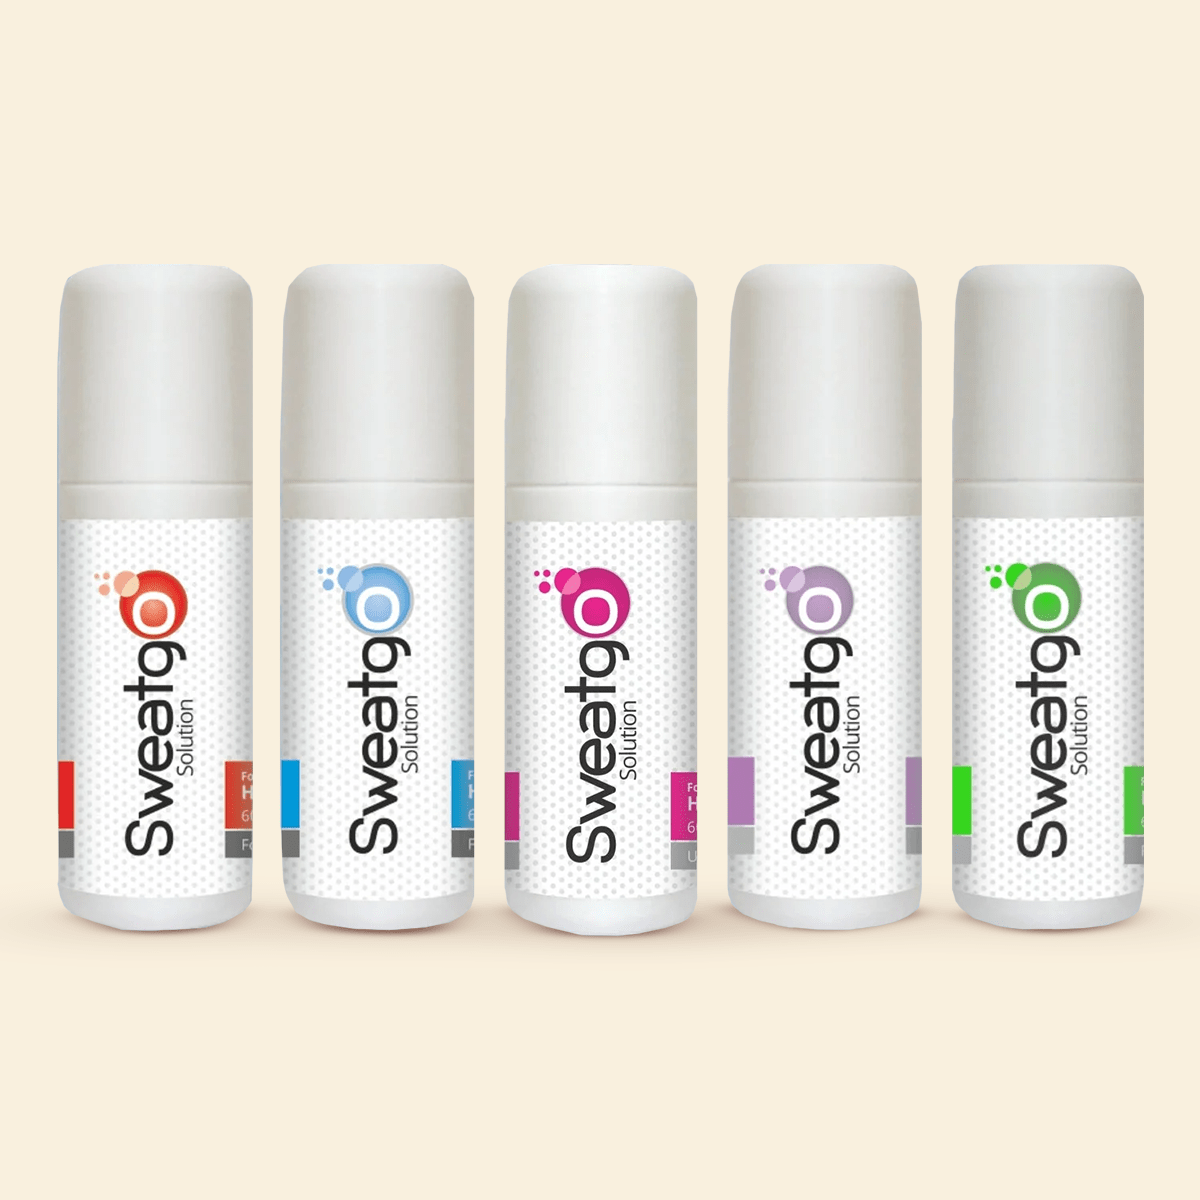 Sweatgo Deodorant,Gift Sets Copy of Sweat Go Smell Fresh & Smell Different Everyday Couples